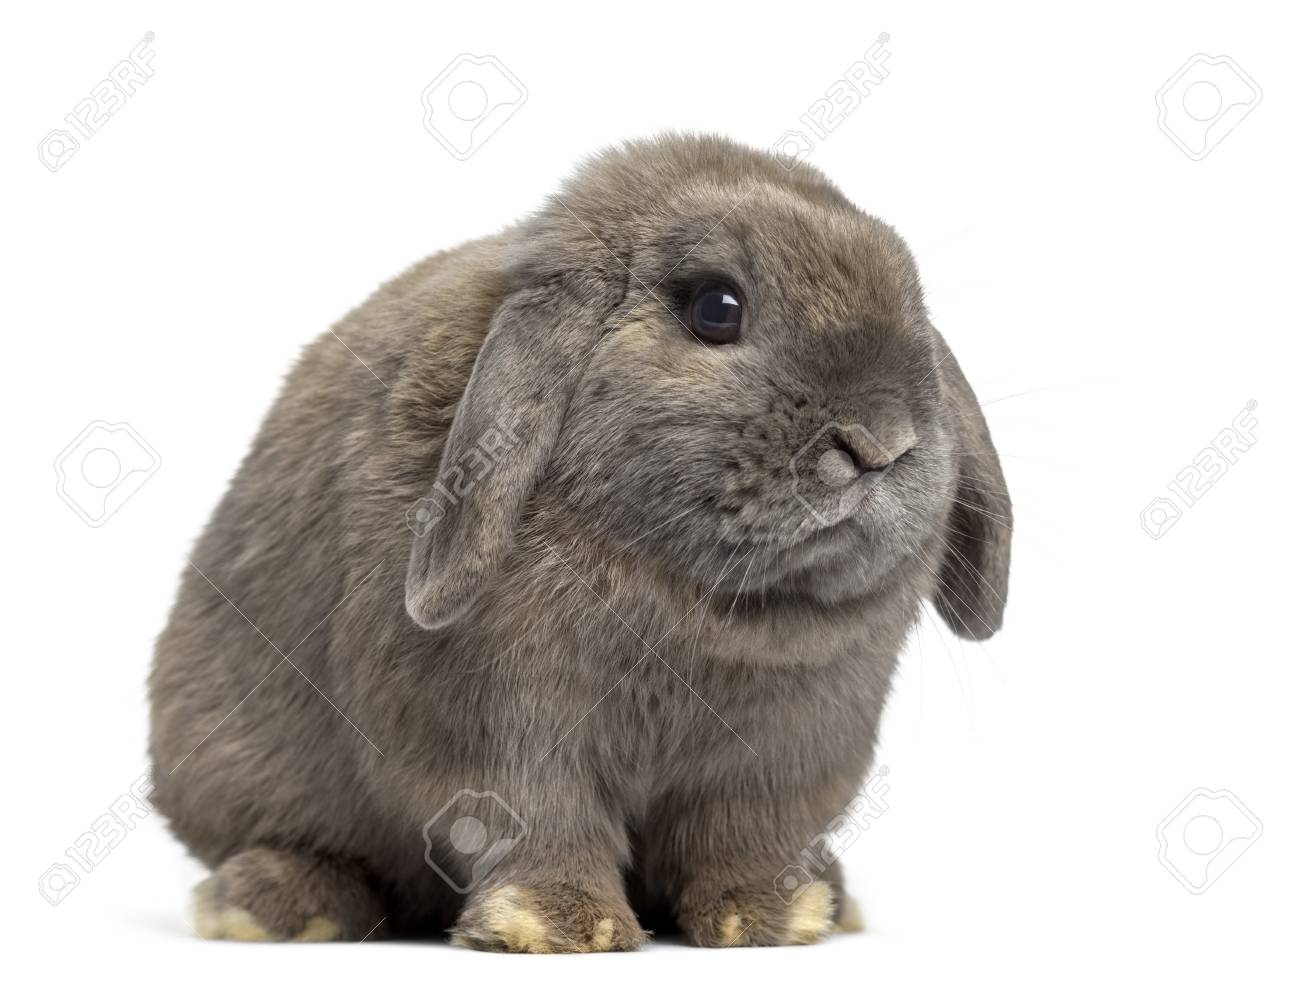 64970660-side-view-of-a-cute-holland-lop-rabbit-isolated-on-white